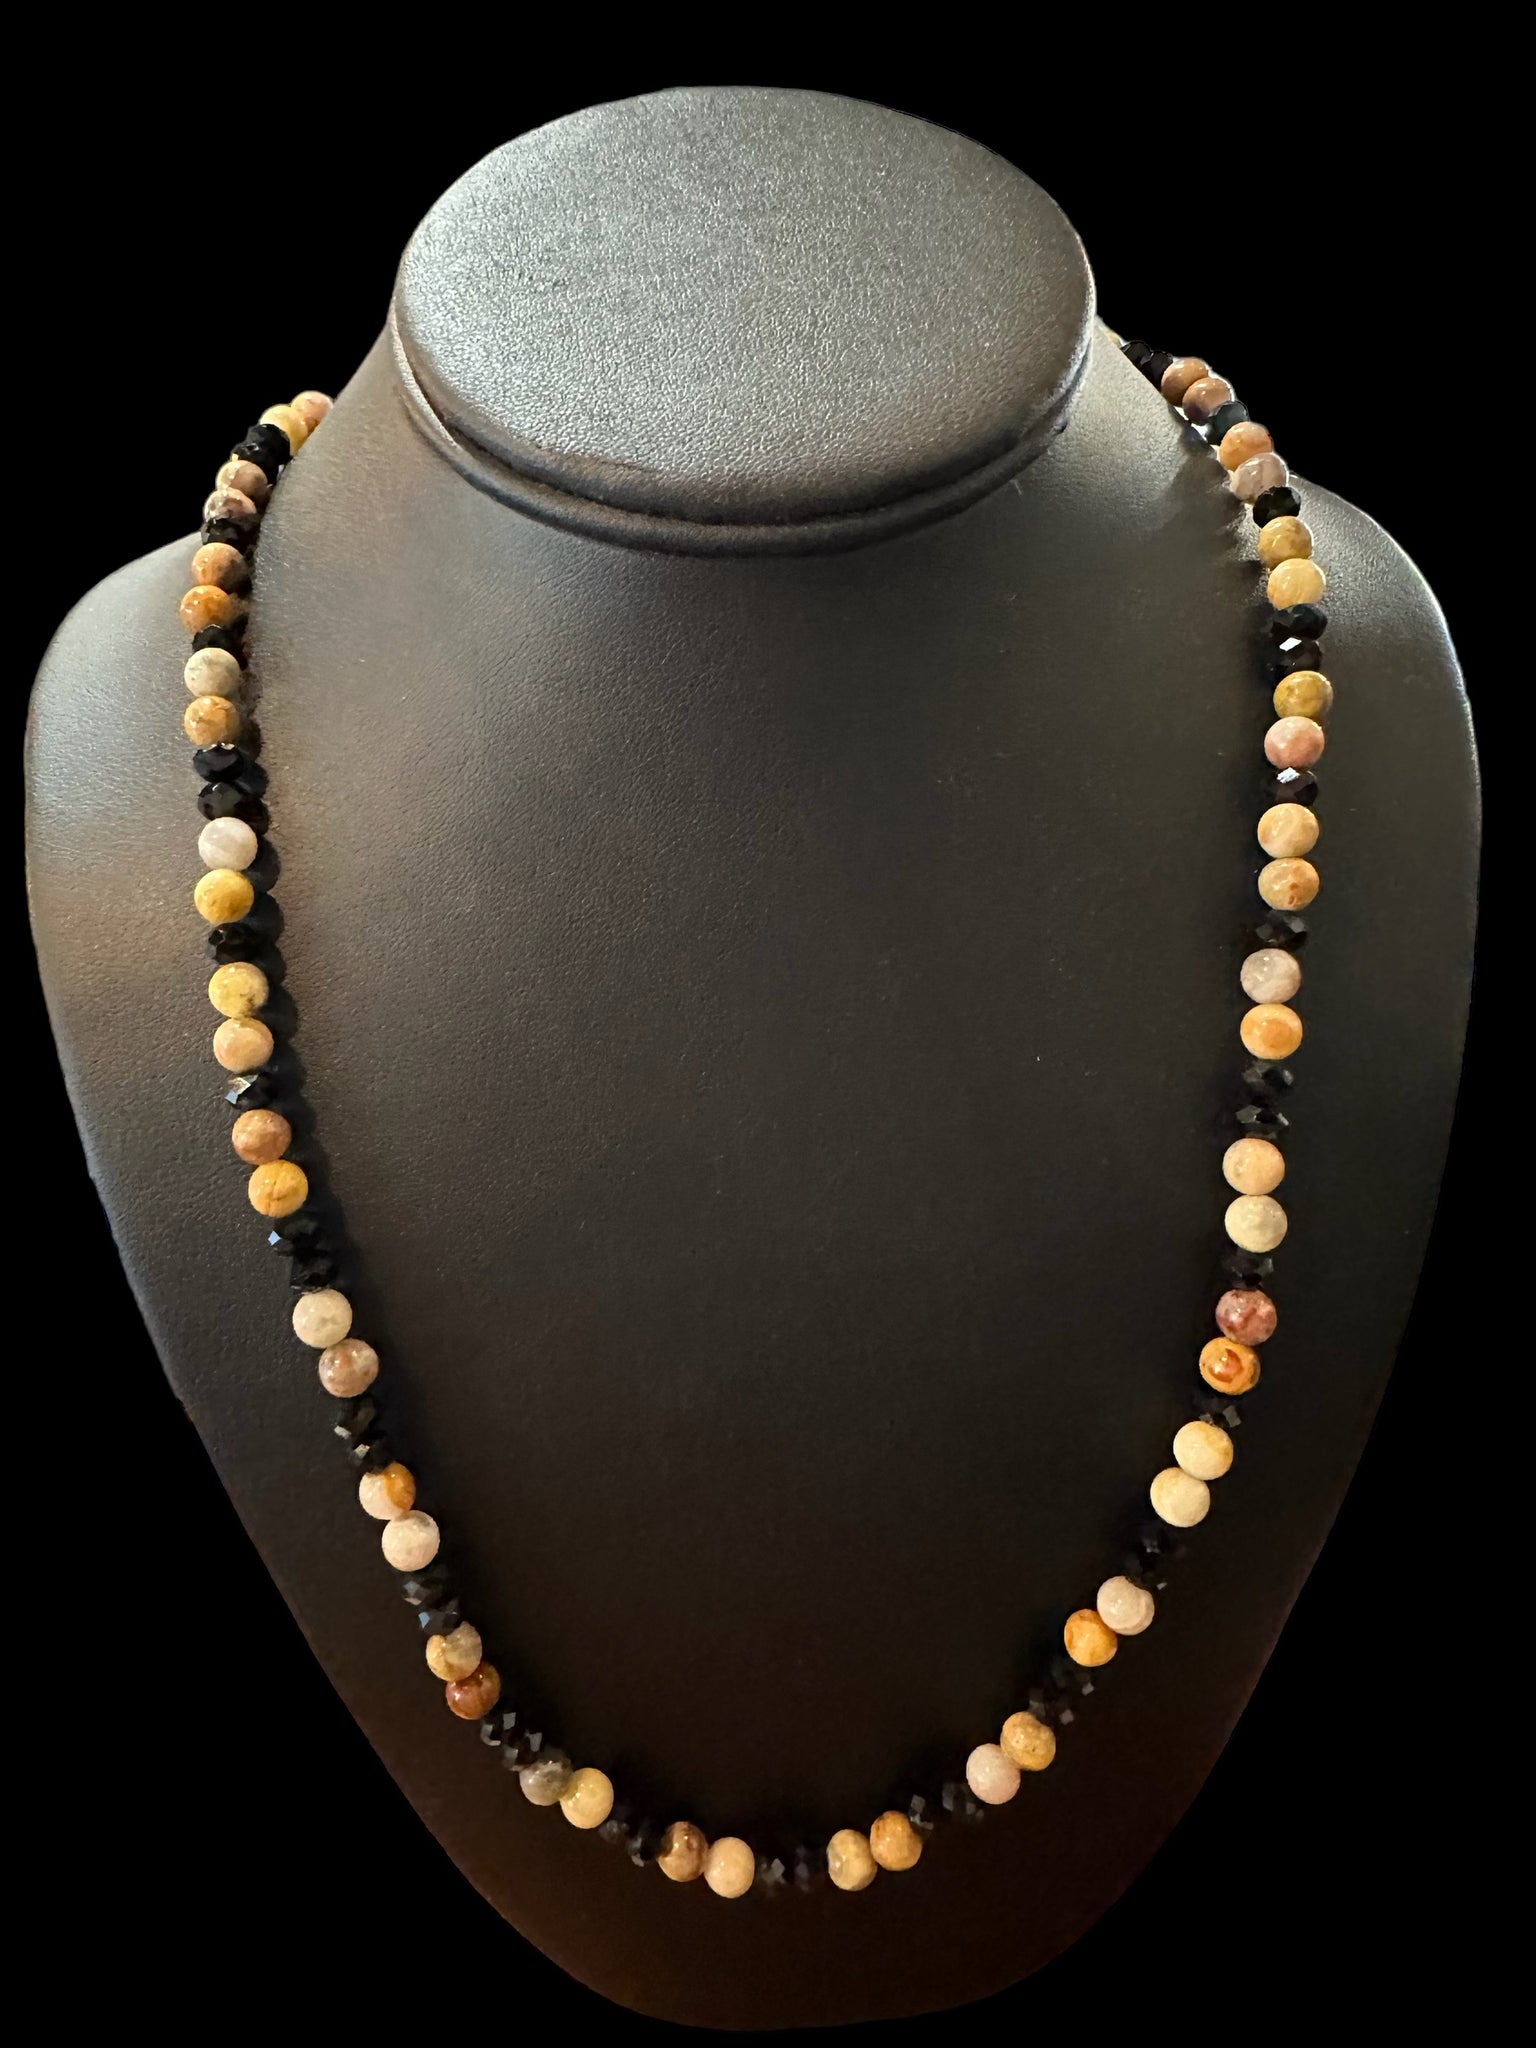 Fancy Beads - 6mm Crazy Lace Agate & Black Faceted Bead Necklace